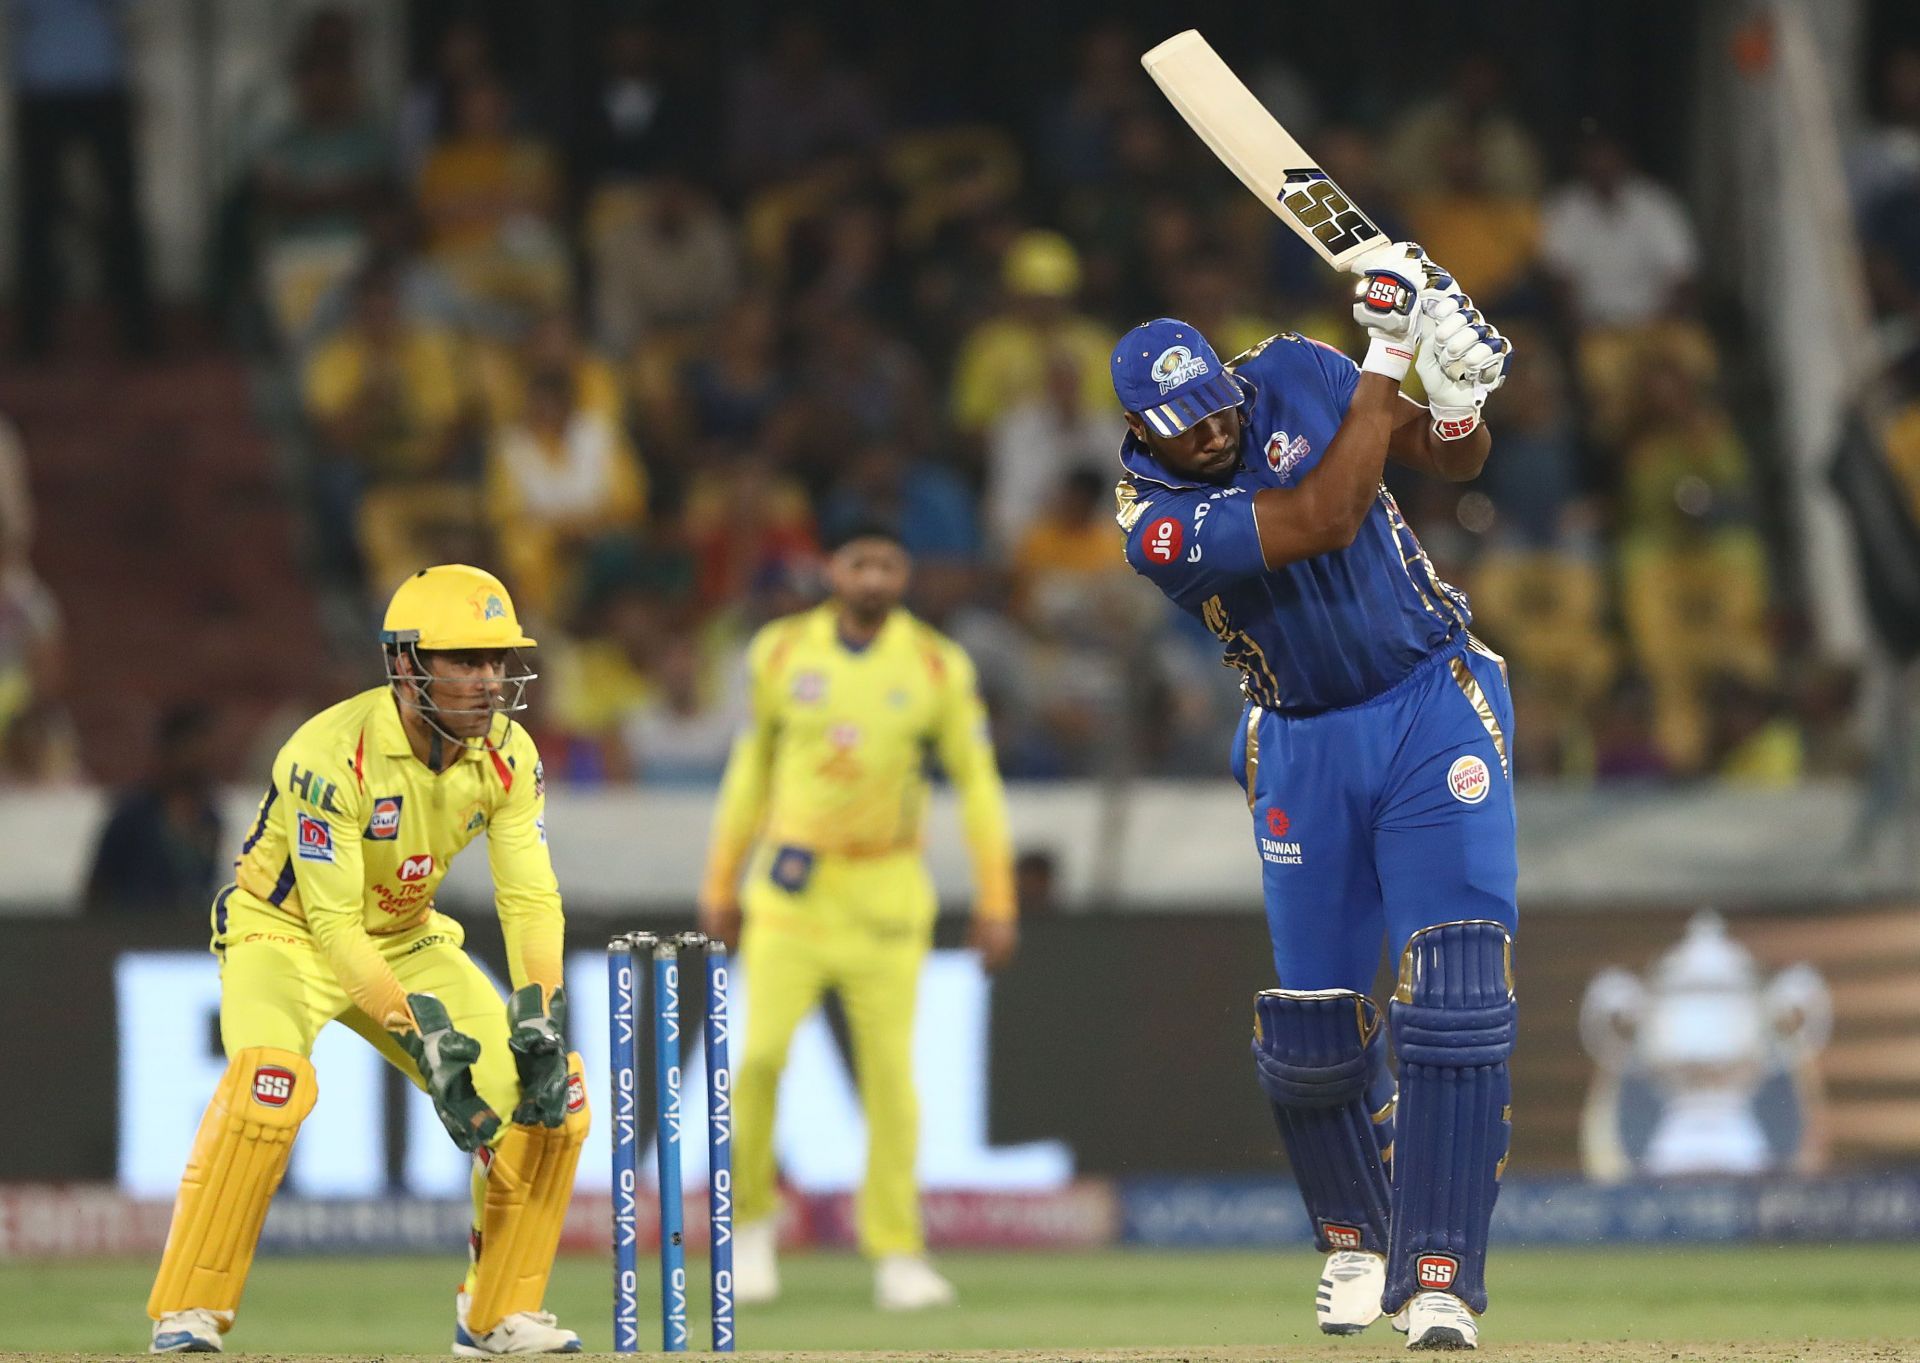 Mumbai Indians and Chennai Super Kings will battle one last time in IPL 2022 tomorrow